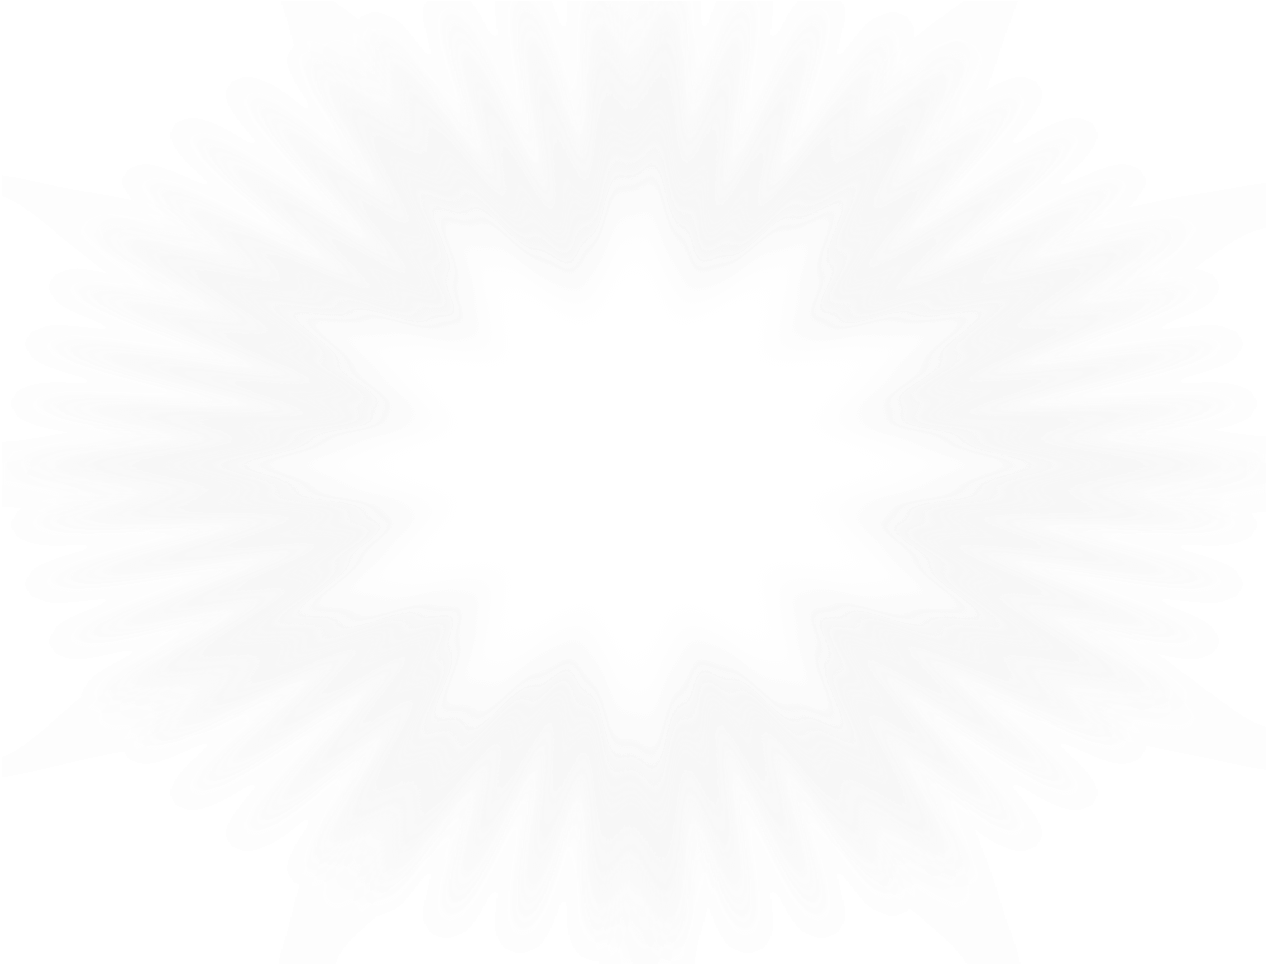 A White Light In The Center Of A Black Background